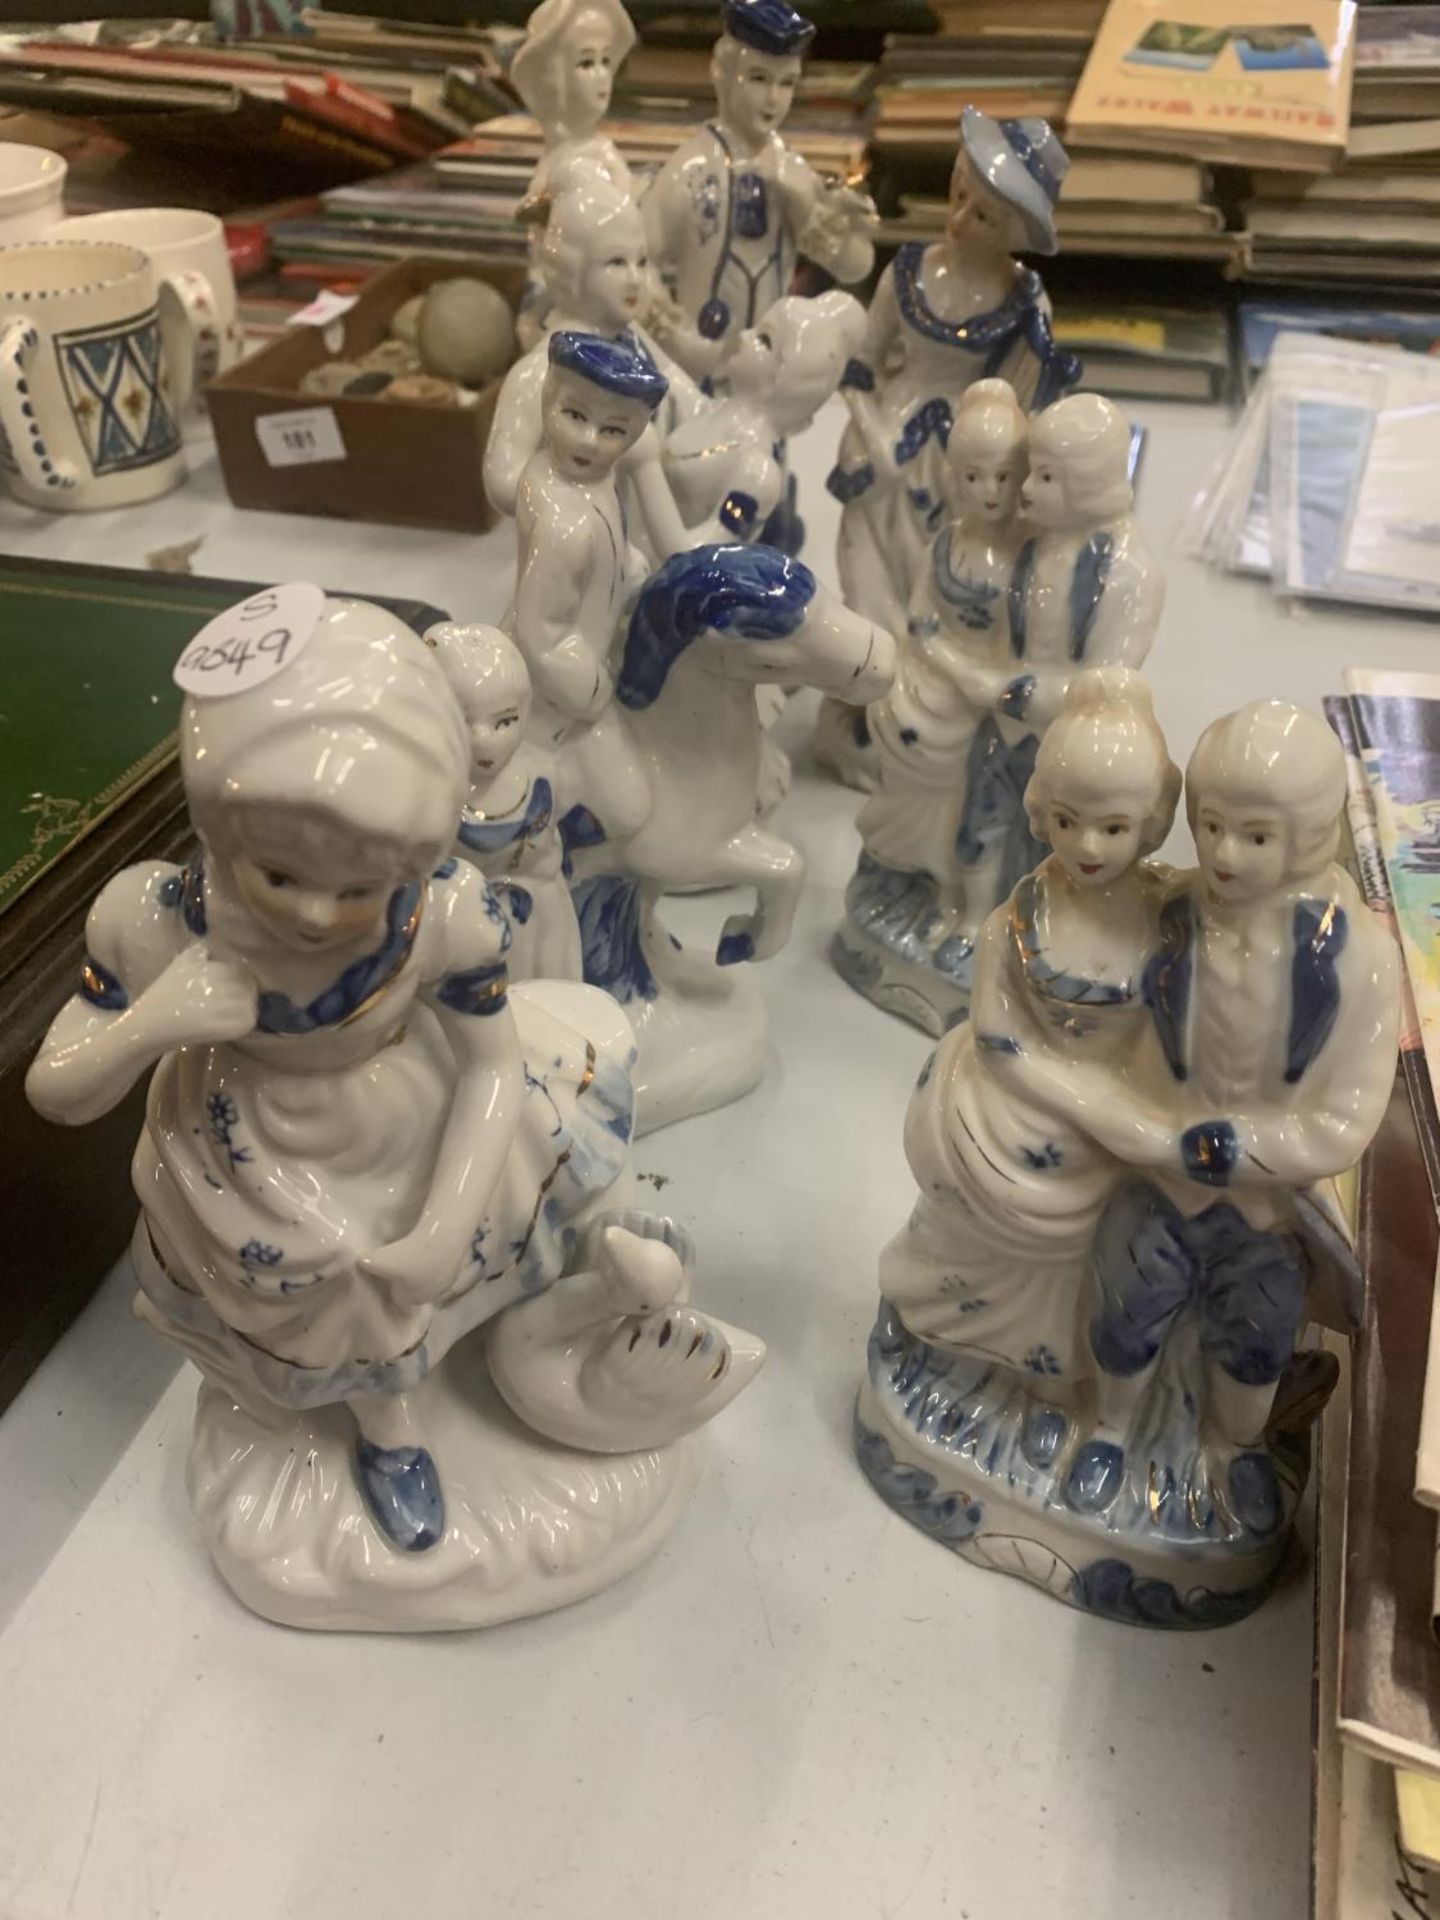 EIGHT CERAMIC FIGURE GROUPS IN THE STAFFORDSHIRE STYLE - Image 2 of 3